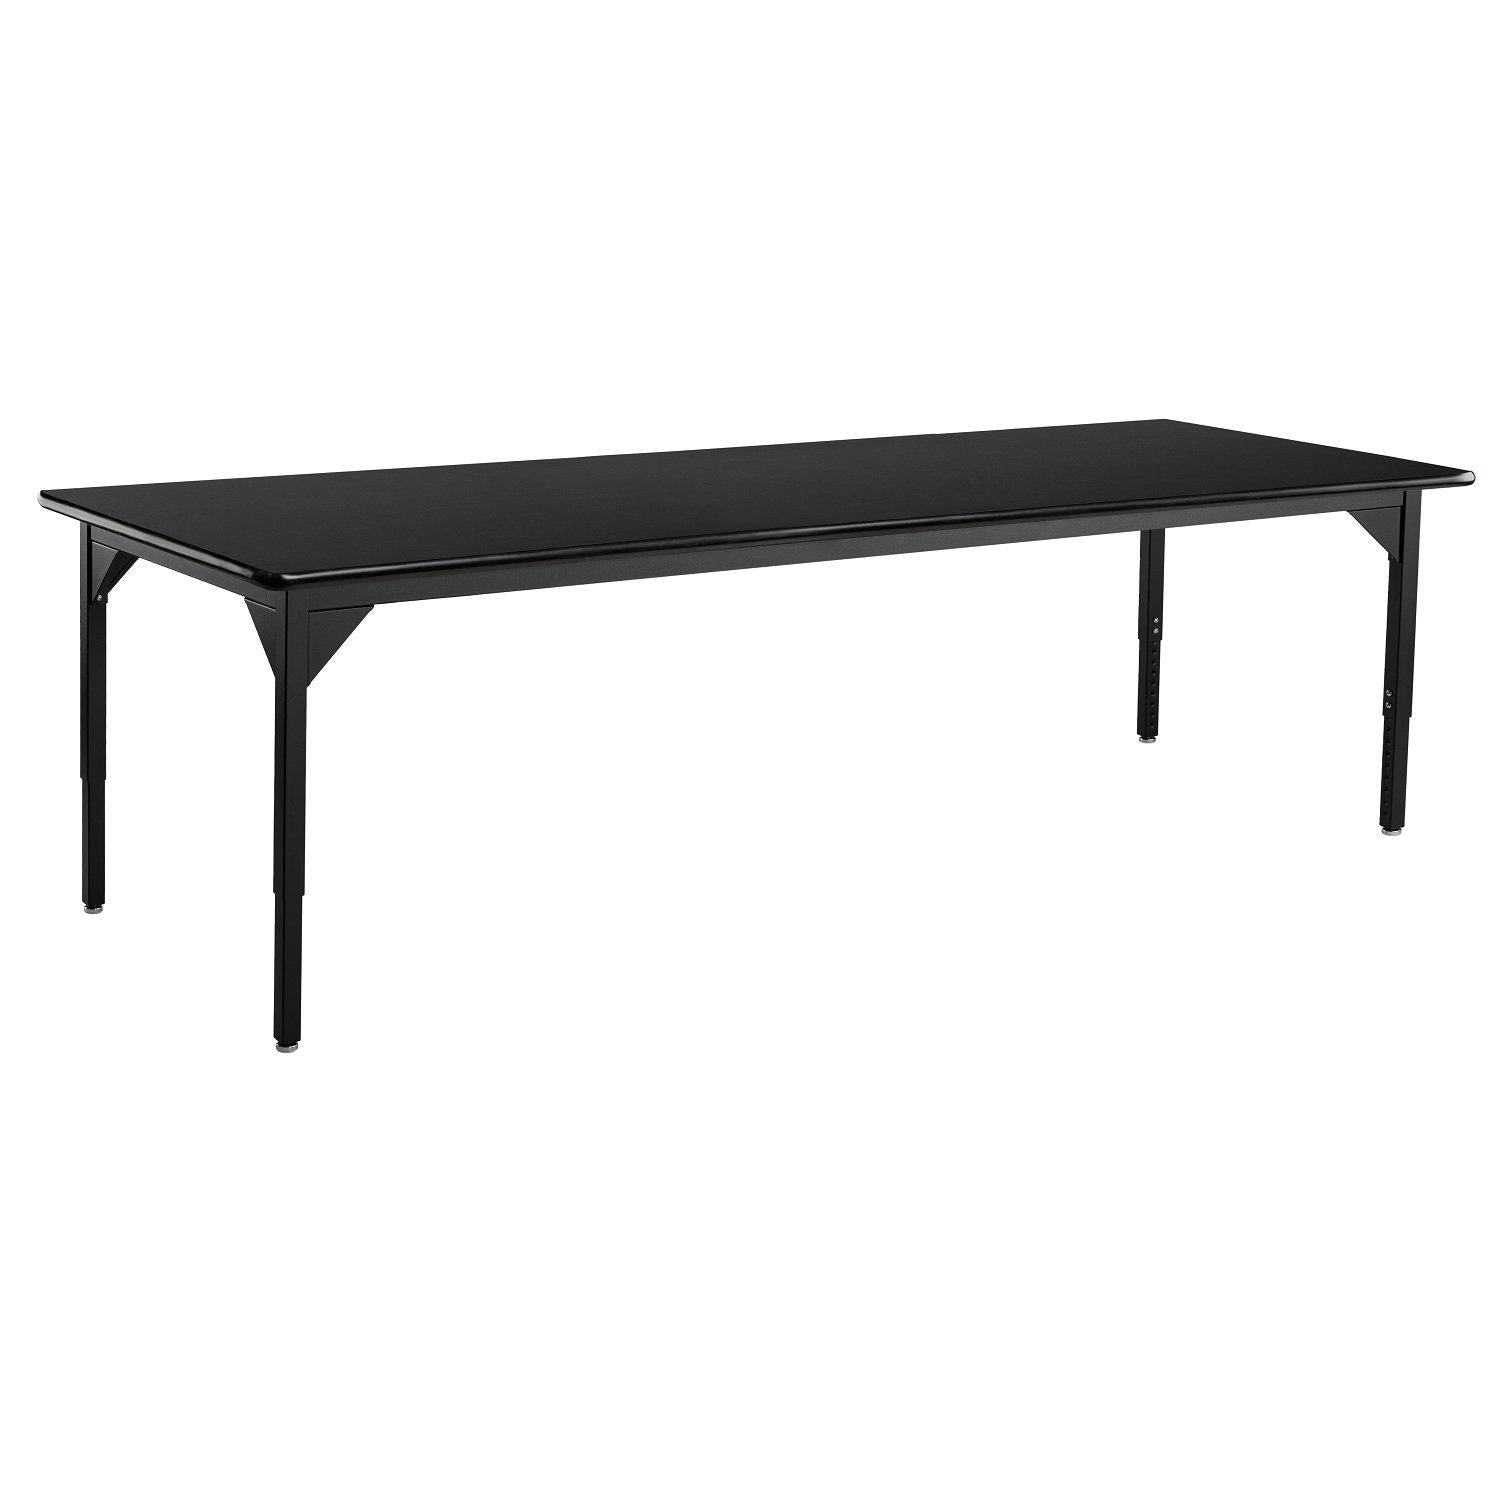 Heavy-Duty Height-Adjustable Utility Table, Black Frame, 42" x 72", High-Pressure Laminate Top with T-Mold Edge